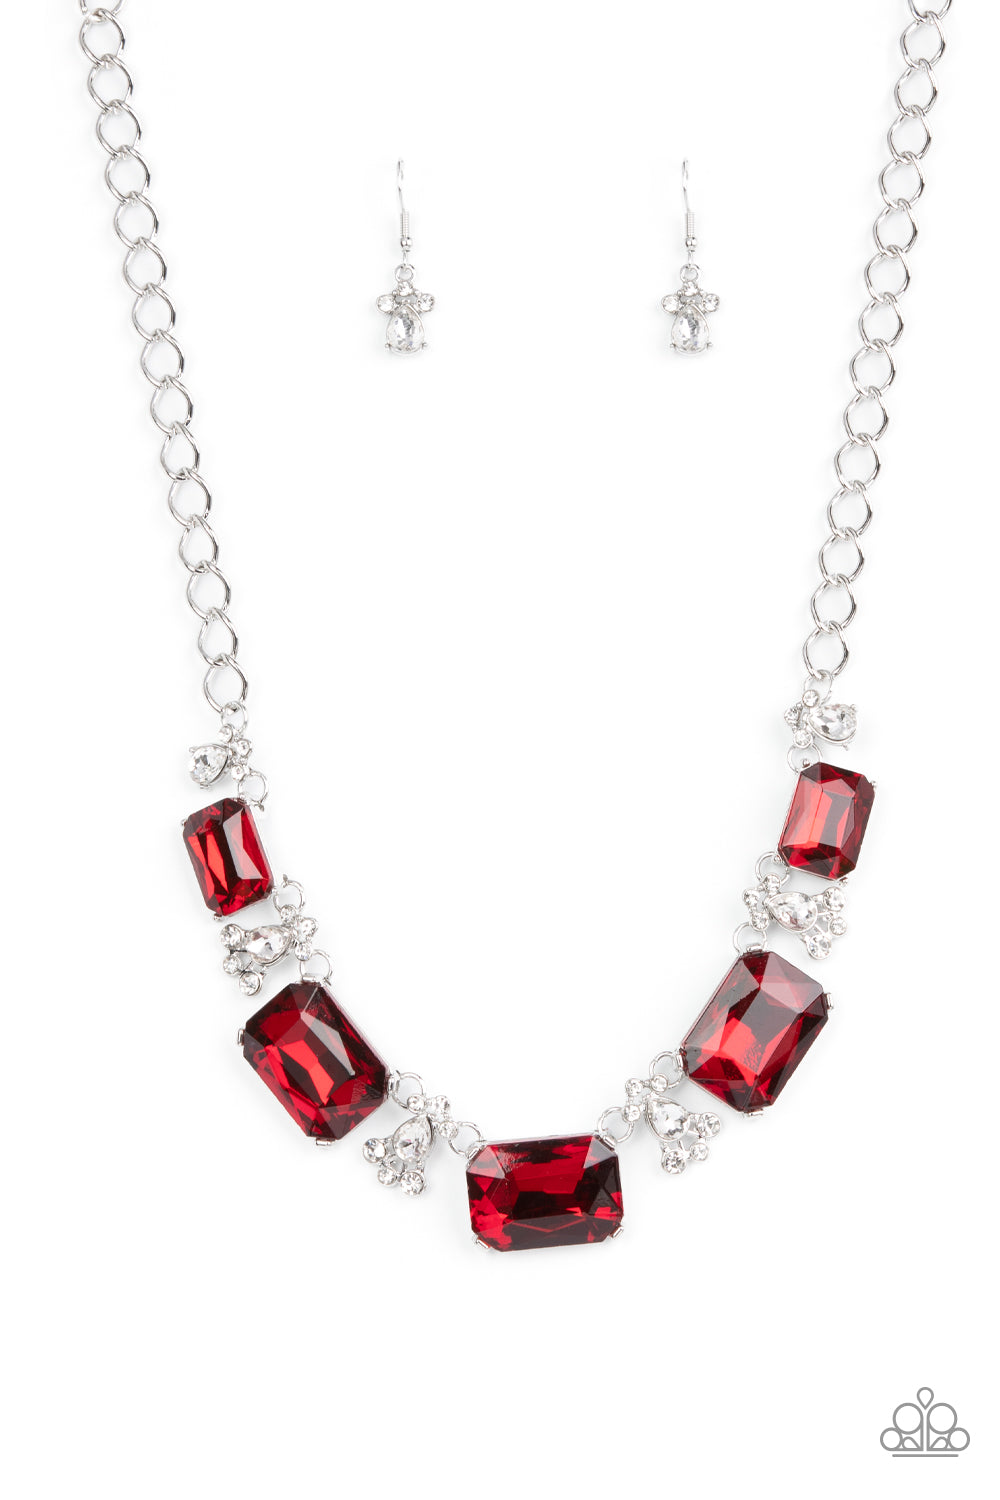 Flawlessly Famous - Red Paparazzi Necklace